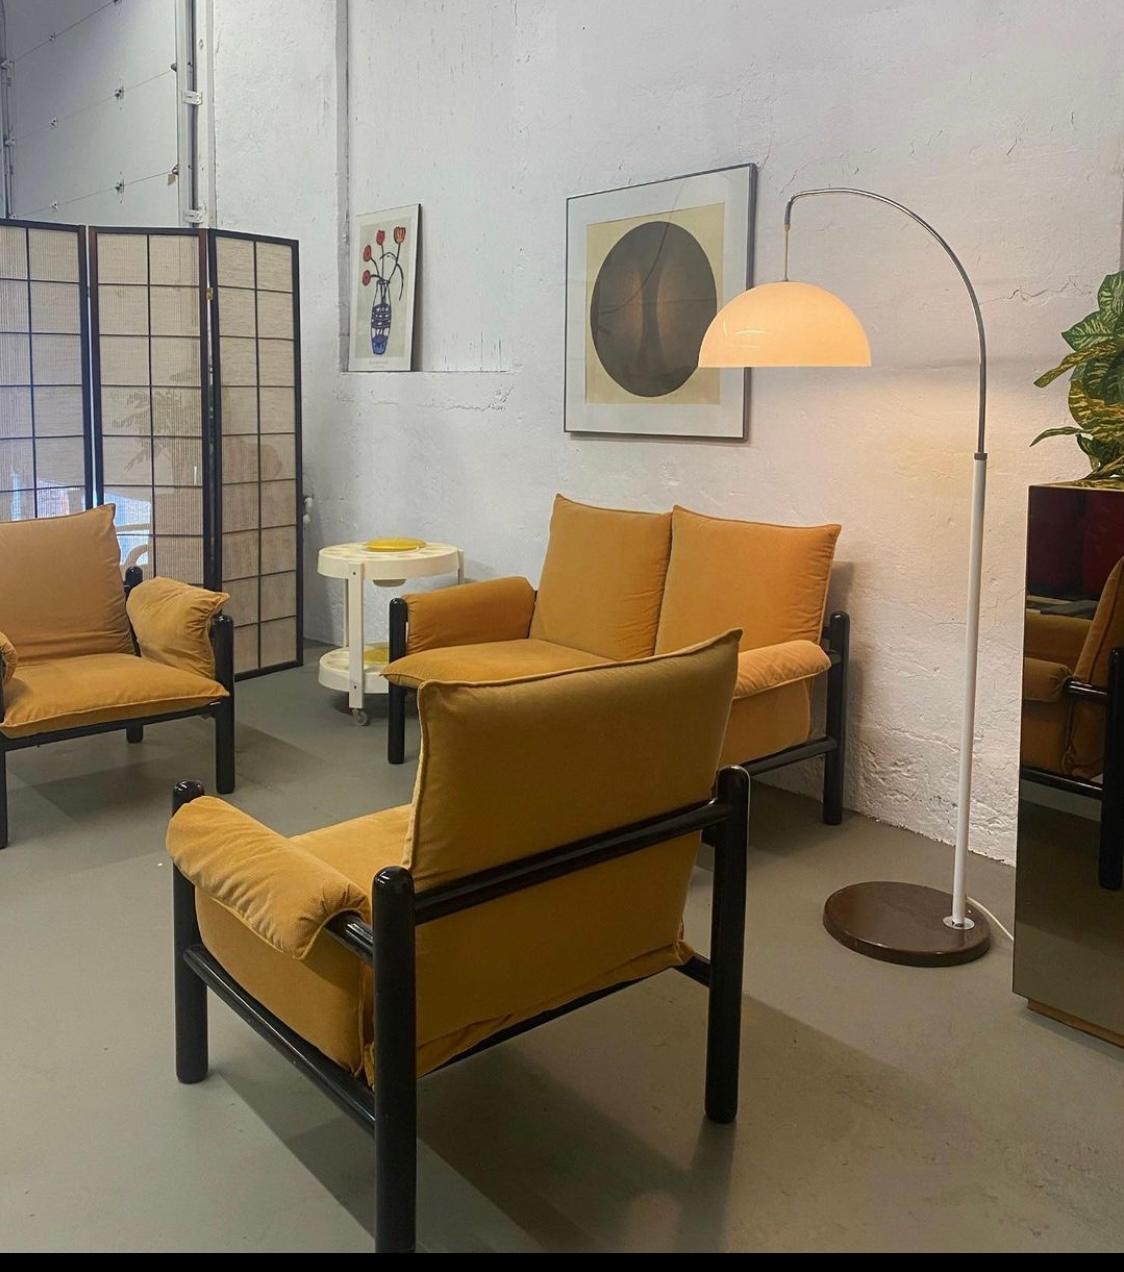 Made by Italian designer A. Sibau, most commonly known for their iconic dinning tables and chairs. This sofa set is a rare find.